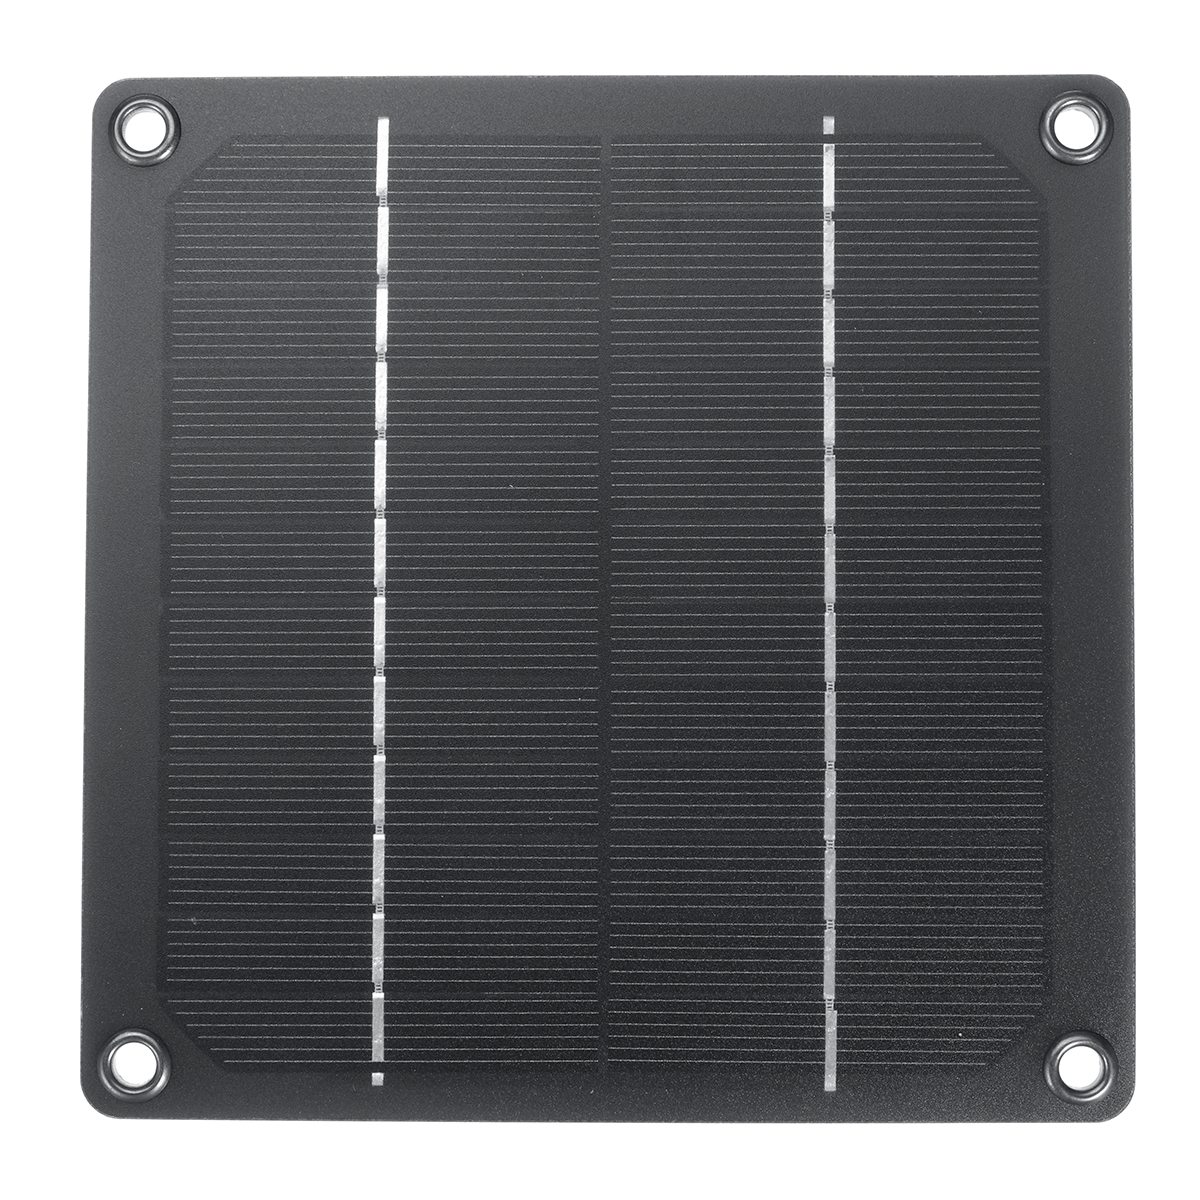 5W-Outdoor-Solar-Powered-Panel-Exhaust-Roof-Attic-Fan-For-Air-Ventilation-Vent-1919375-5